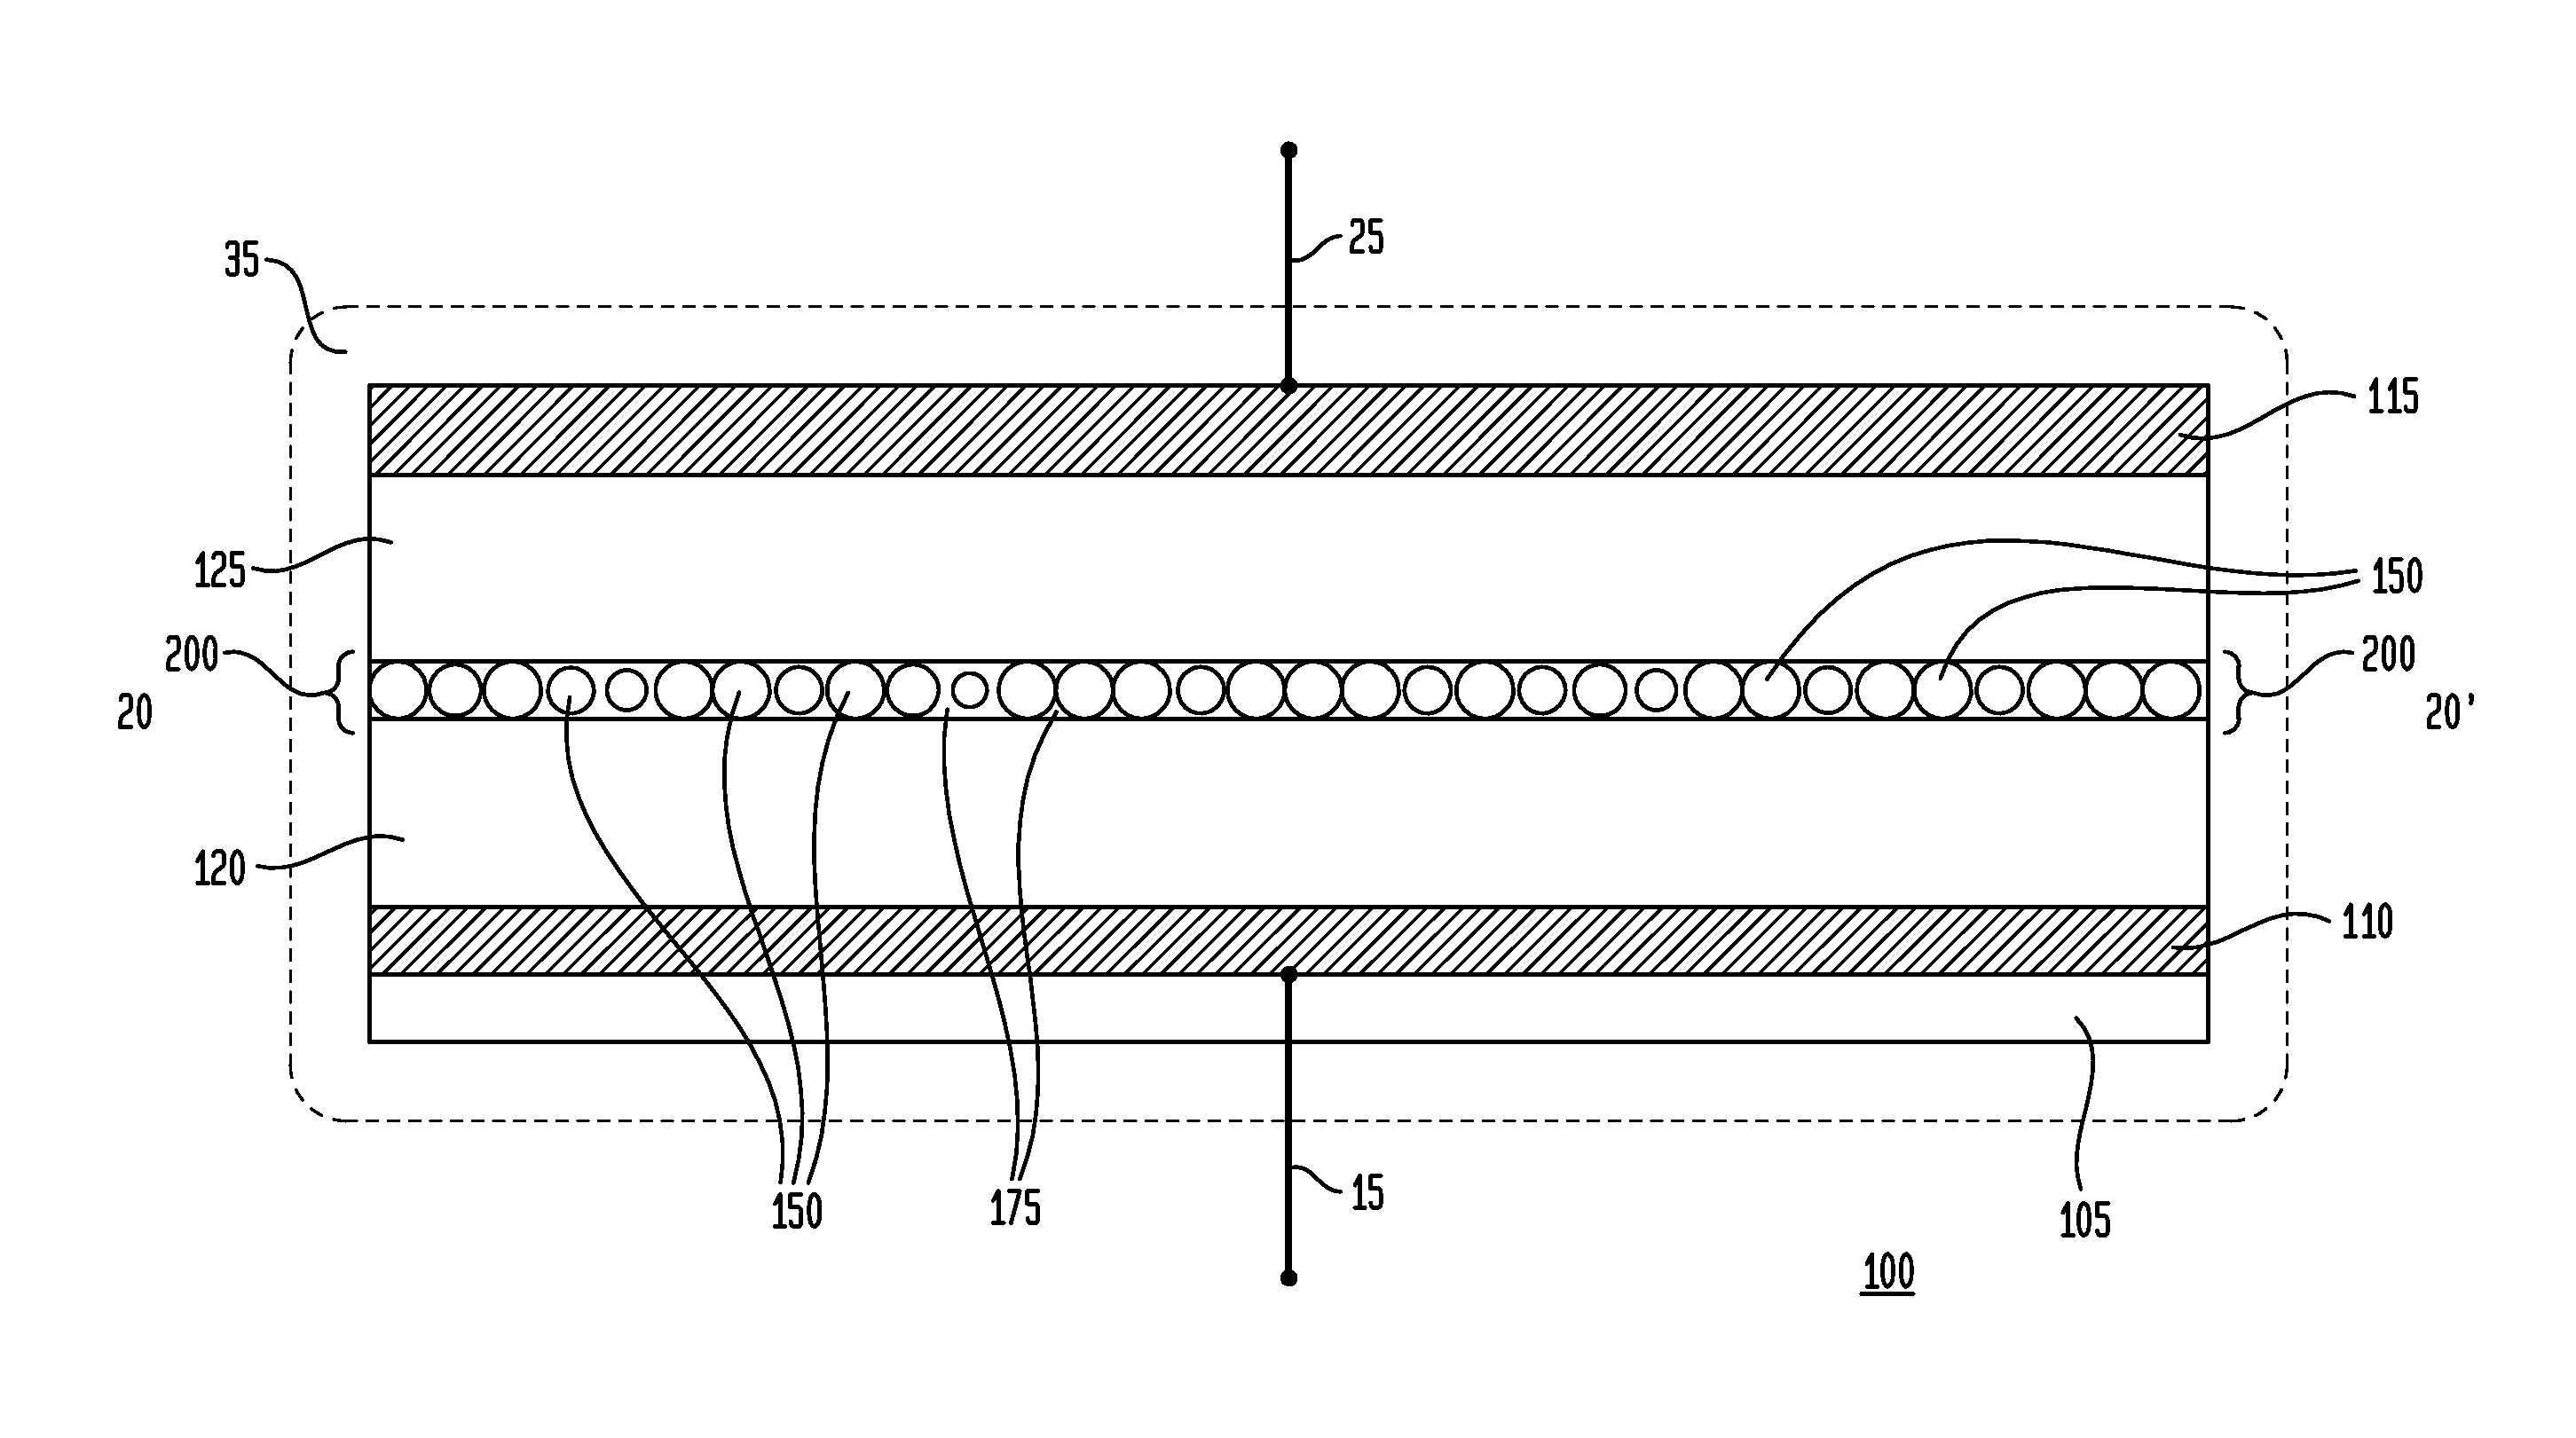 Printable Composition for an Ionic Gel Separation Layer for Energy Storage Devices